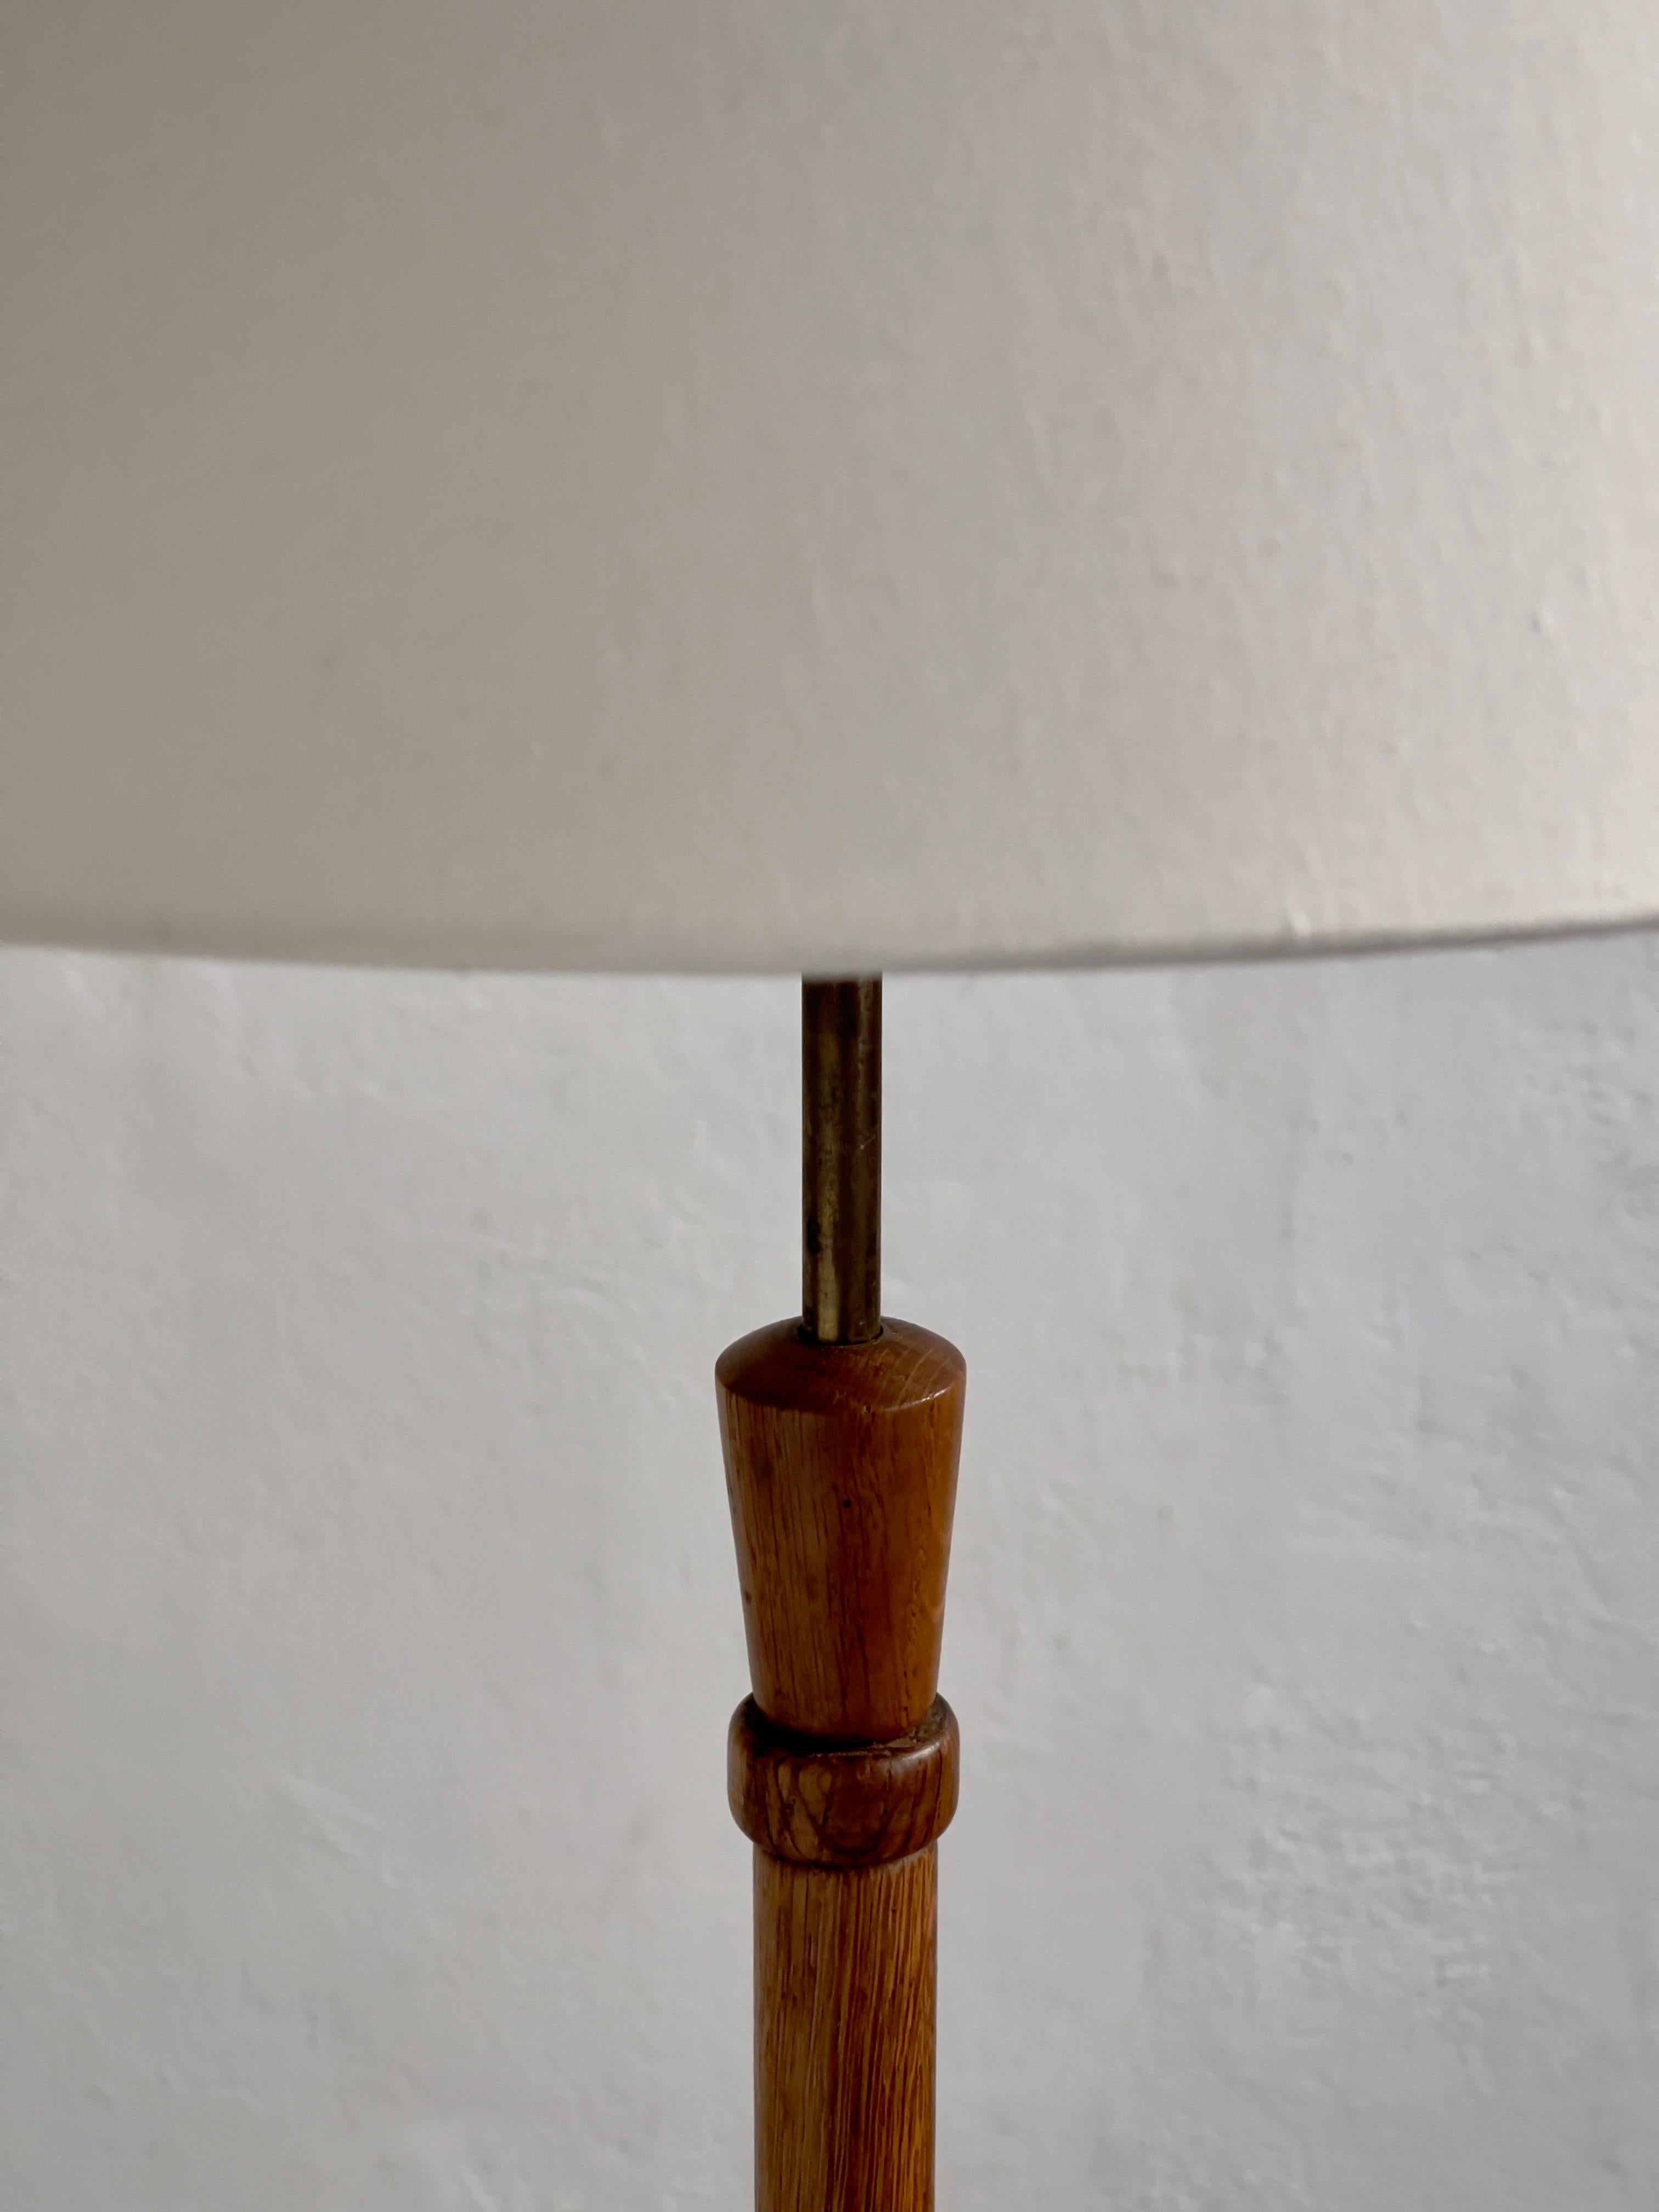 This rare Danish midcentury floor lamp from the 1960s stands as a testament to the exquisite craftsmanship and timeless elegance of Scandinavian design during that era. Crafted meticulously from solid oak and brass, its design epitomizes the fusion